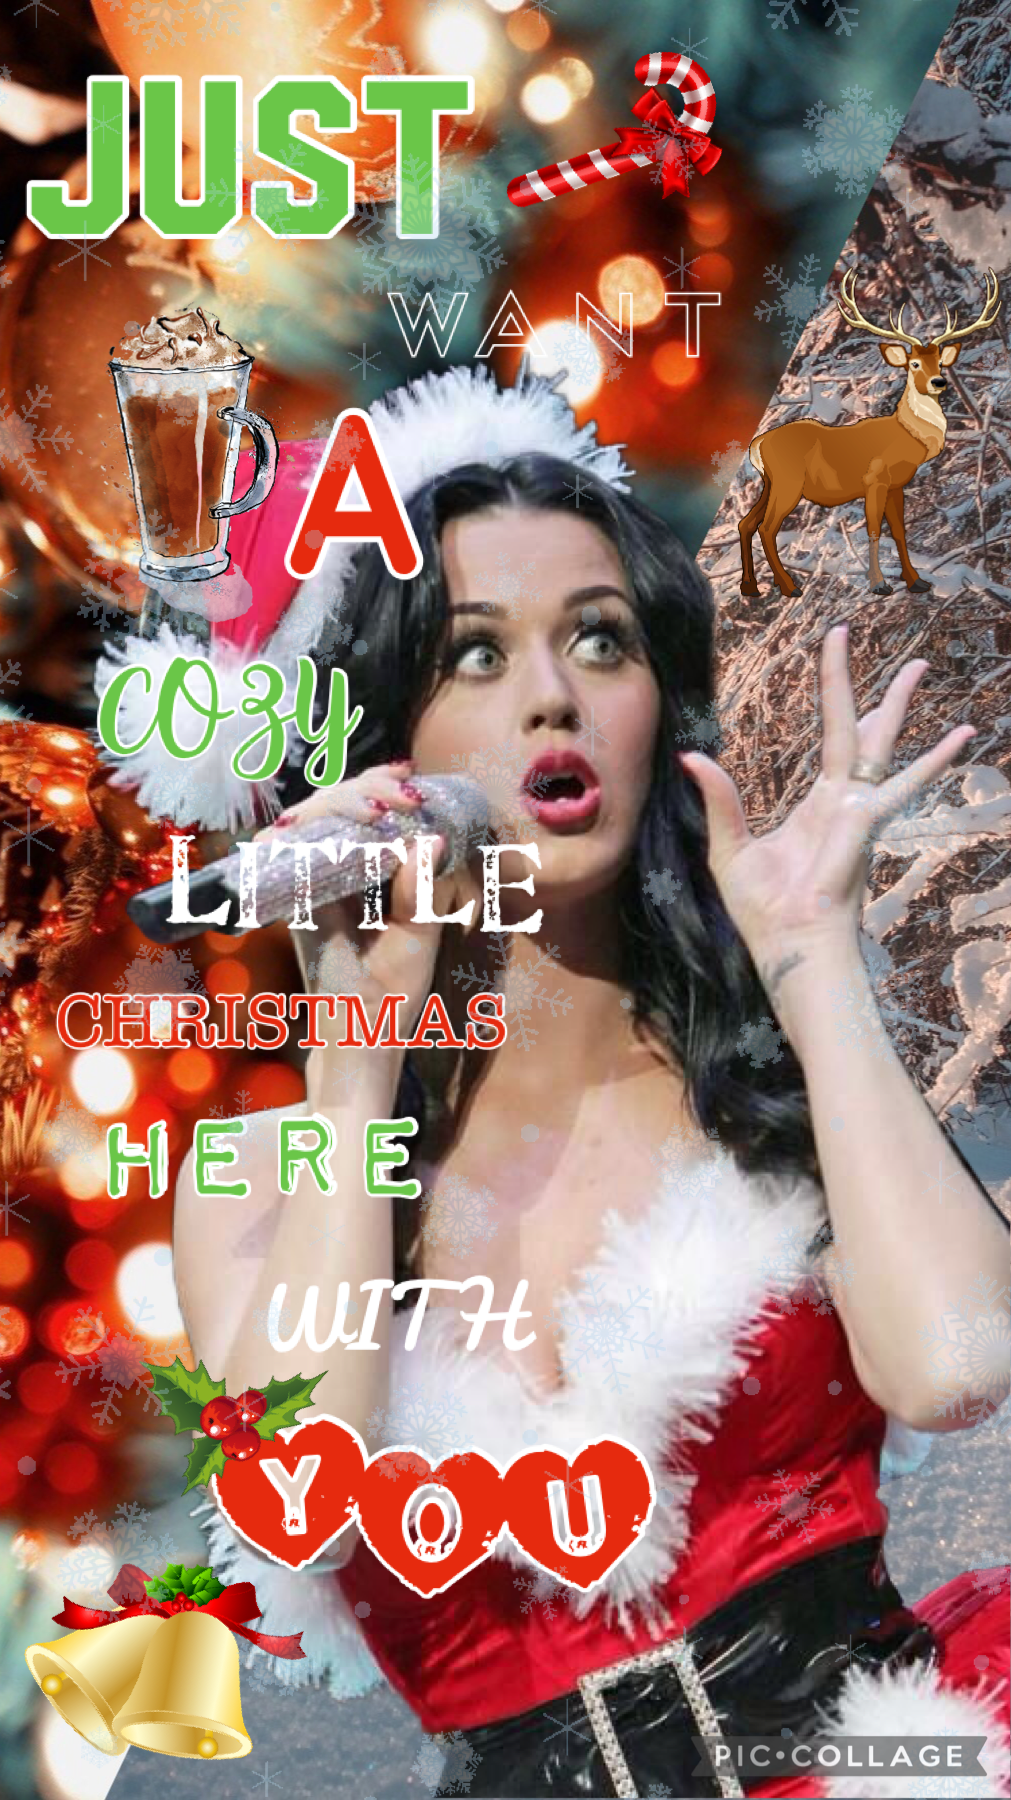 ❤️⚪️💚TAP💚⚪️❤️
💚⚪️❤️Katy Perry edit for @urlocalmaniac’s Xmas competition! ❤️⚪️💚
🎄Katy Perry lyrics from her song ‘Cozy Little Christmas’ 🎄